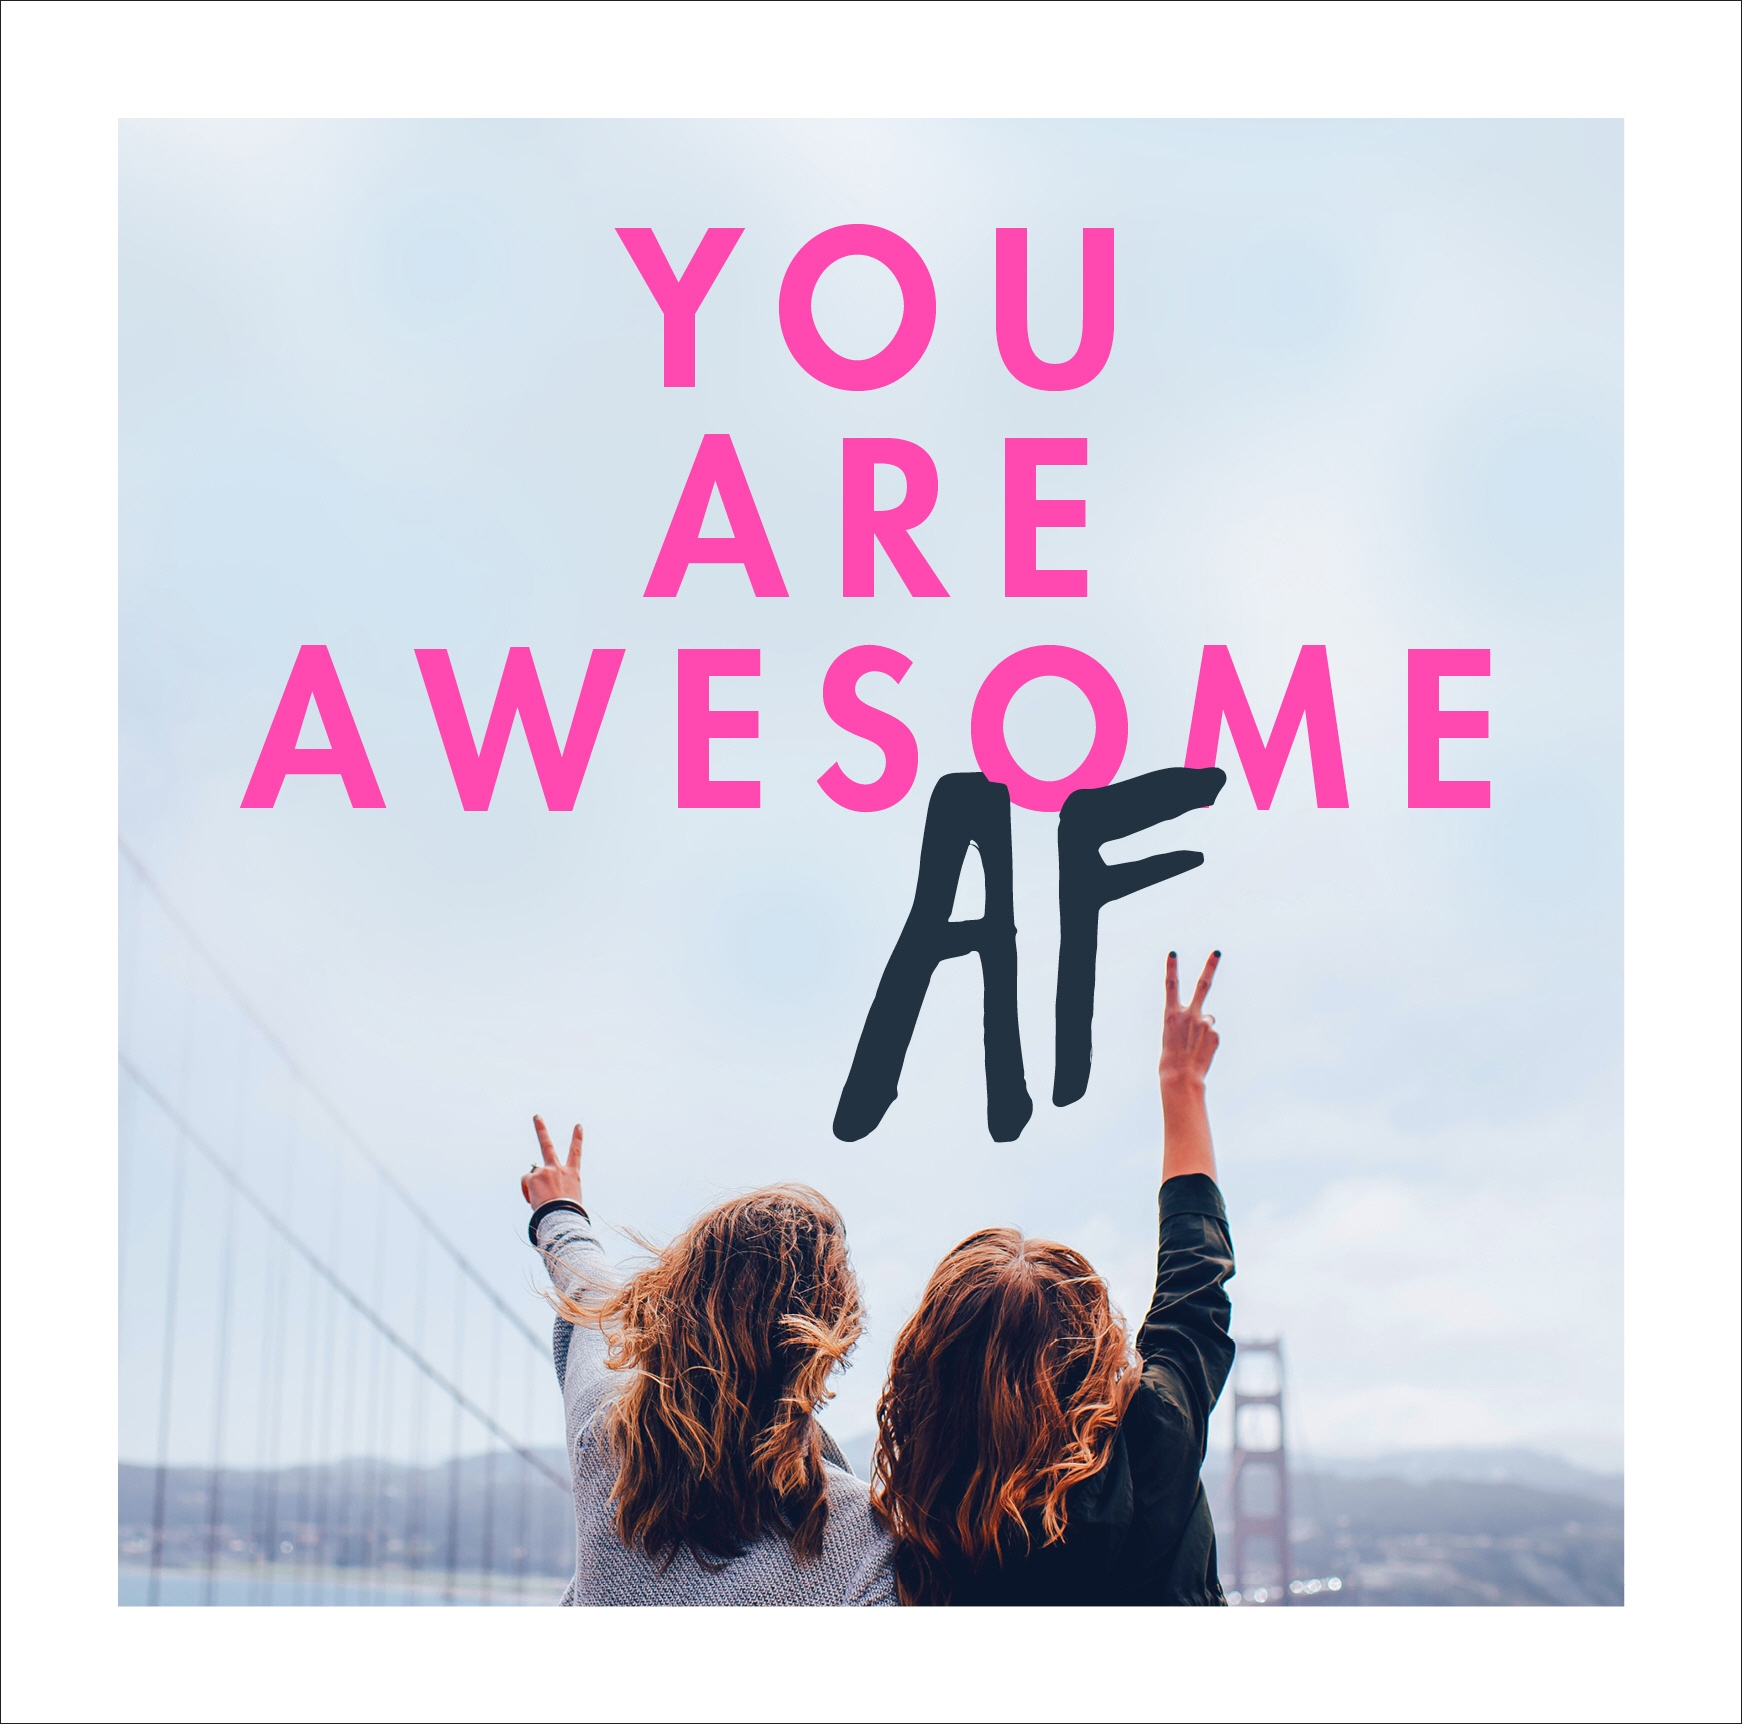 You Are Awesome AF by No Author Details - Penguin Books New Zealand